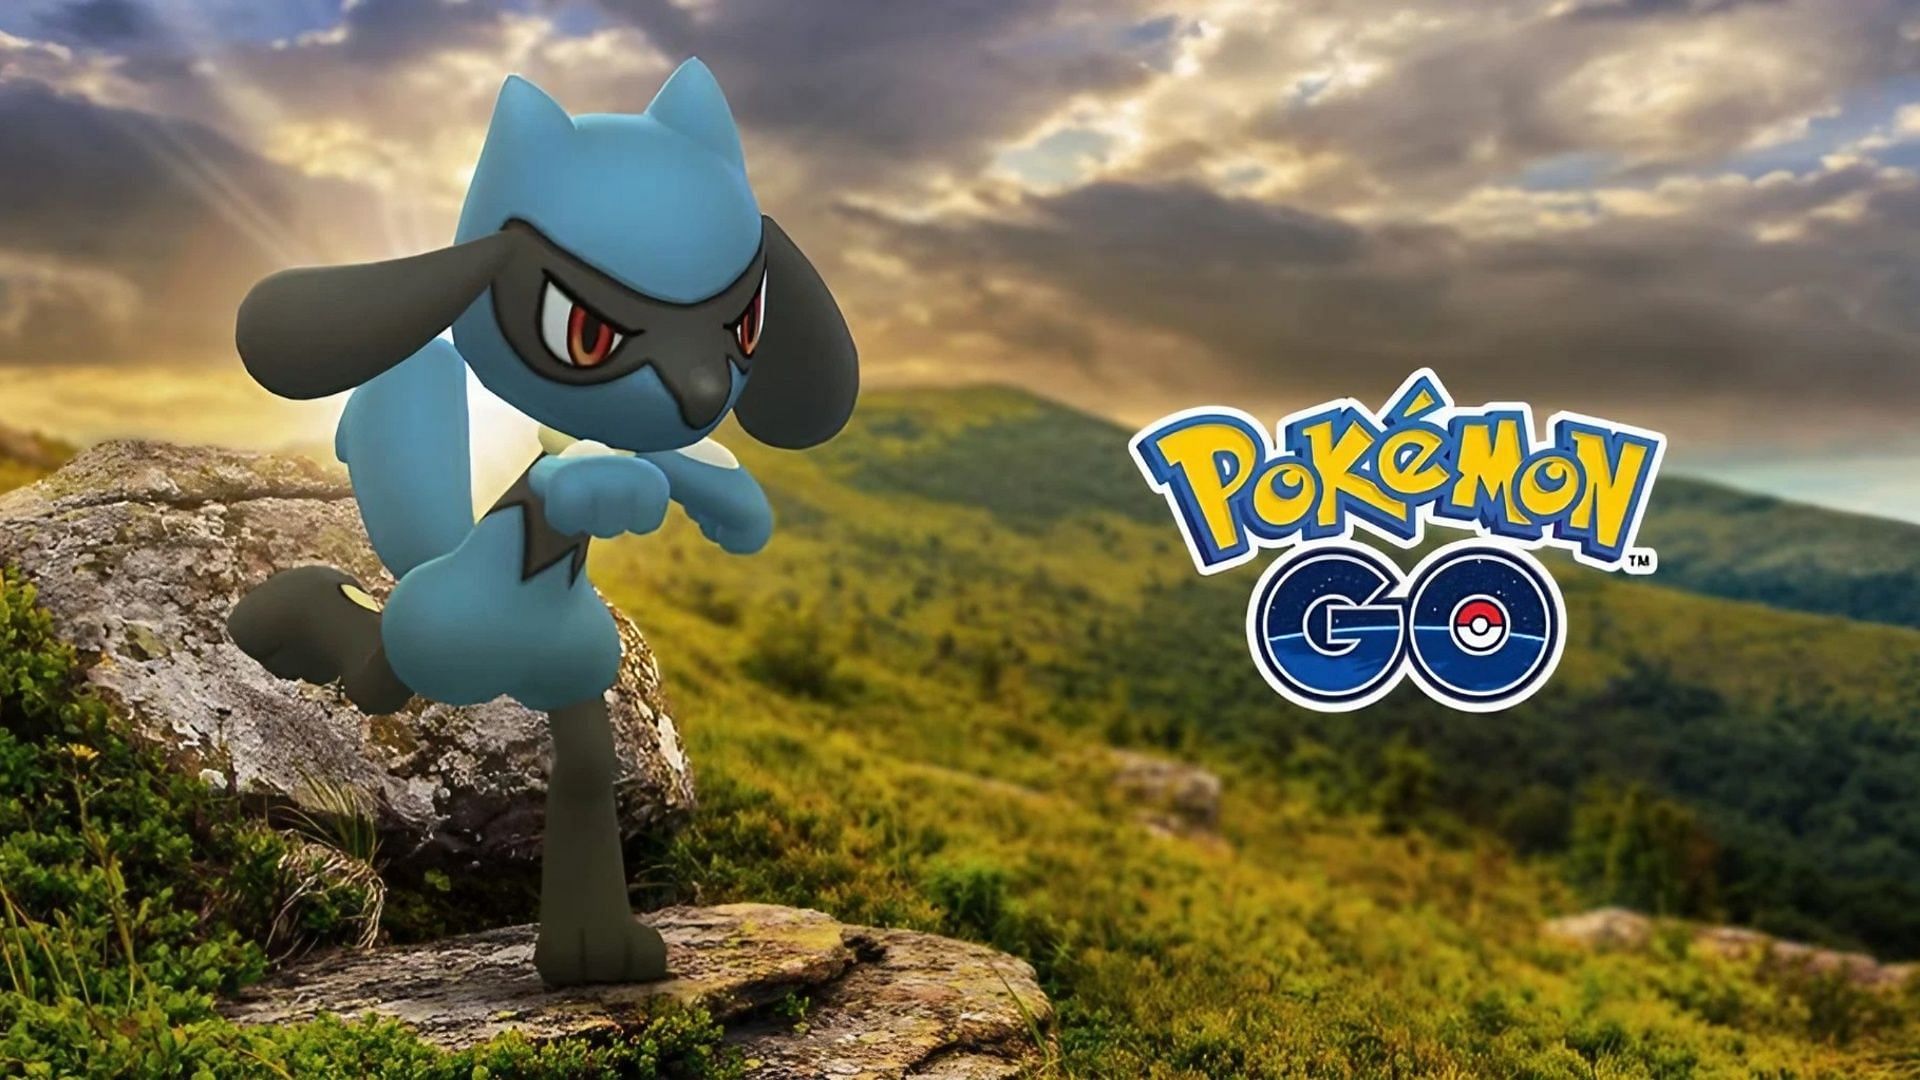 Pokemon GO Riolu Hatch Day Egg pool, Timed Research, event bonus, and more